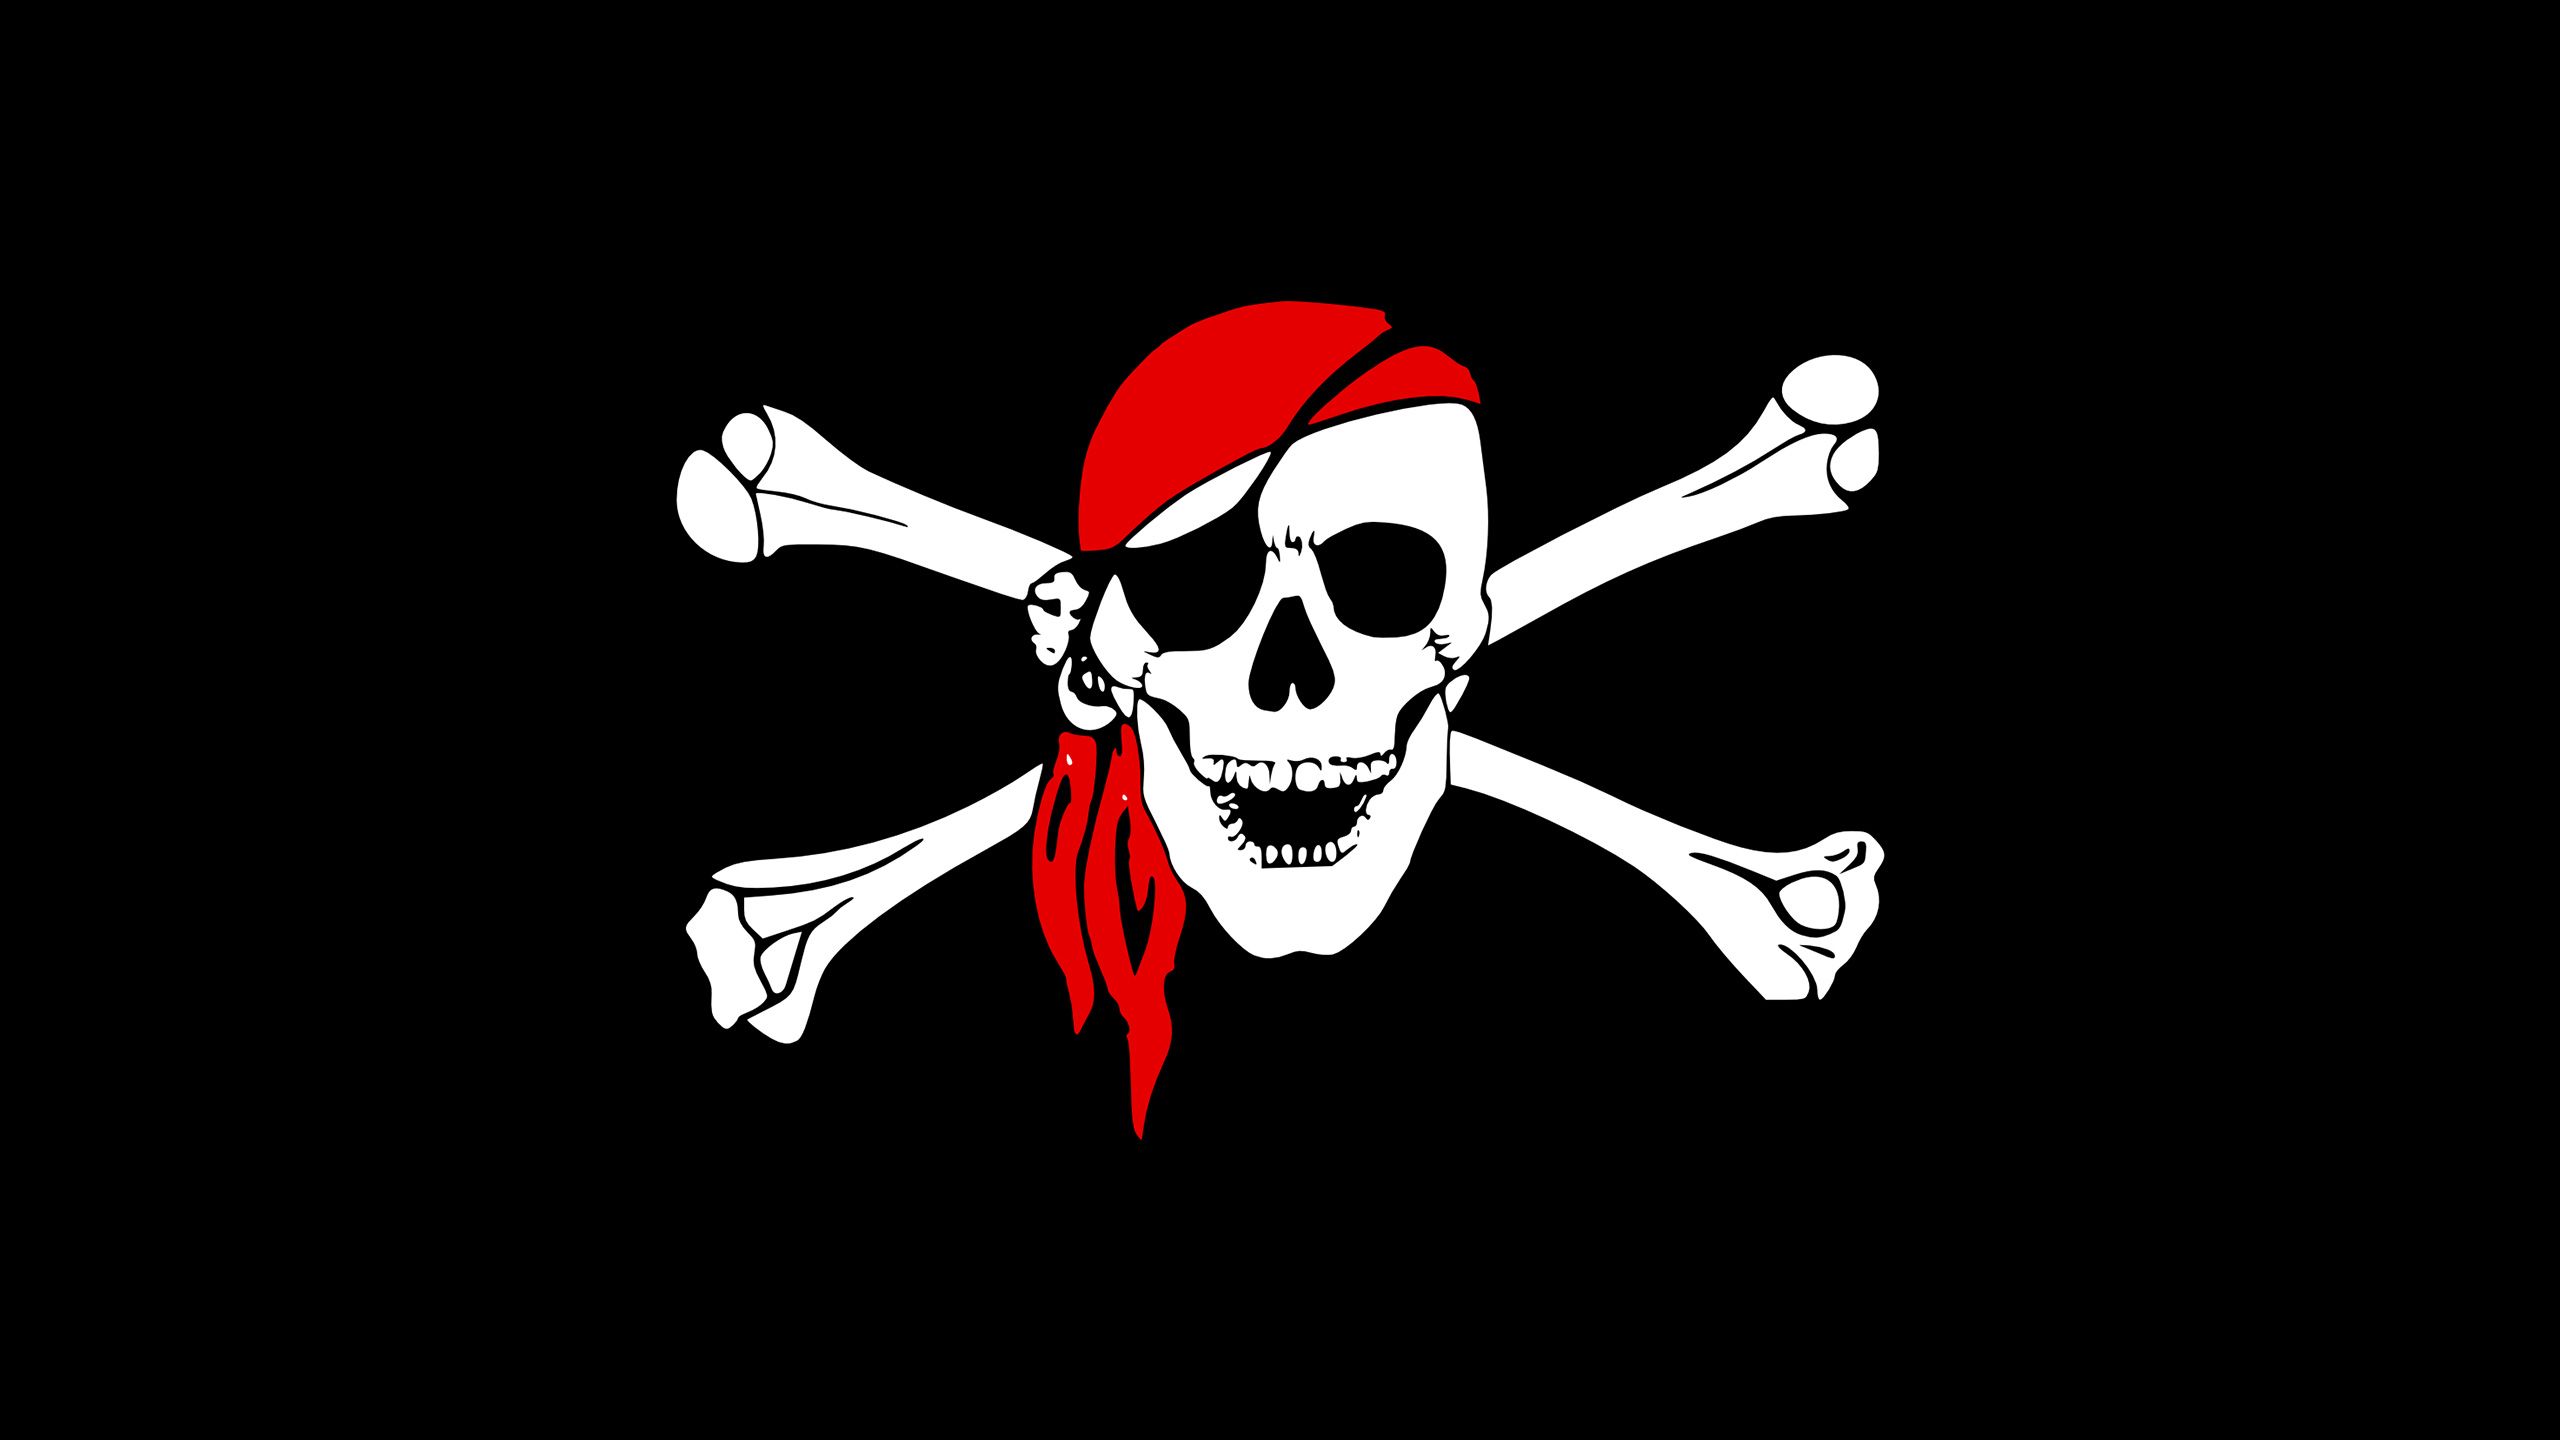 Girl and Pirate Flag Wallpaper Free Girl and Pirate Flag